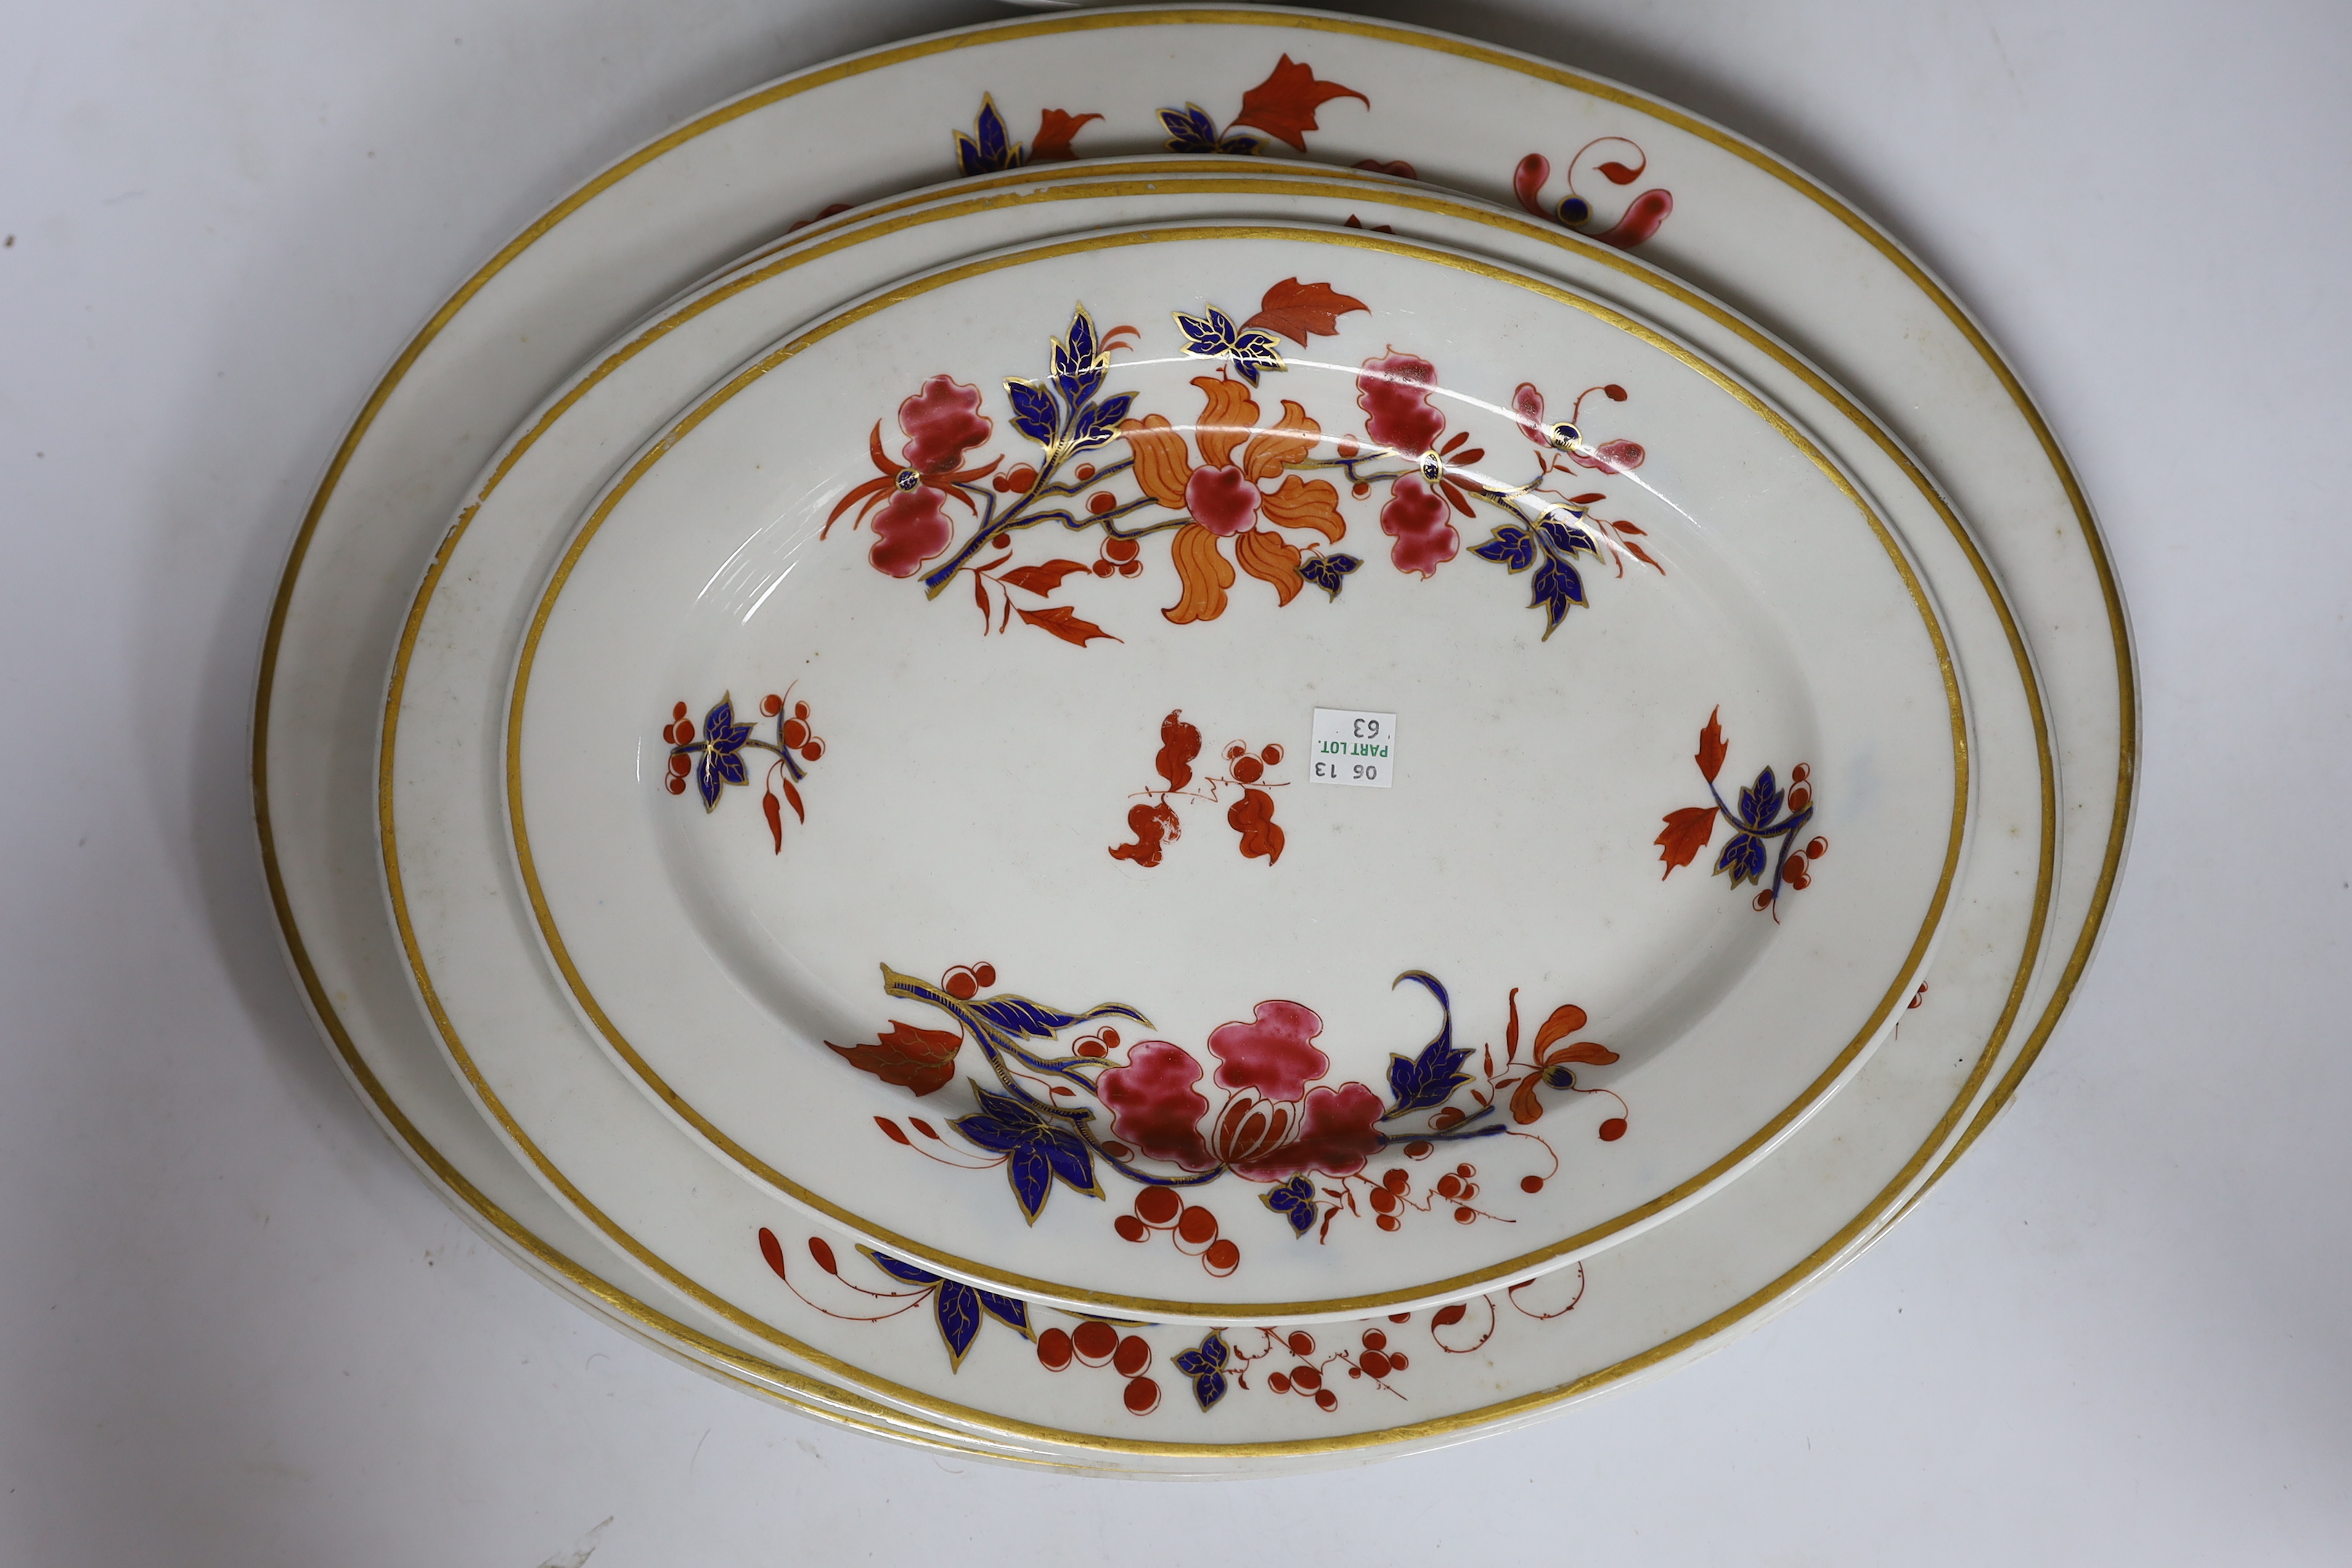 Flight, Barr & Barr Worcester part dinner service, early 19th century, comprising serving dishes, shallow bowls, etc. (13)